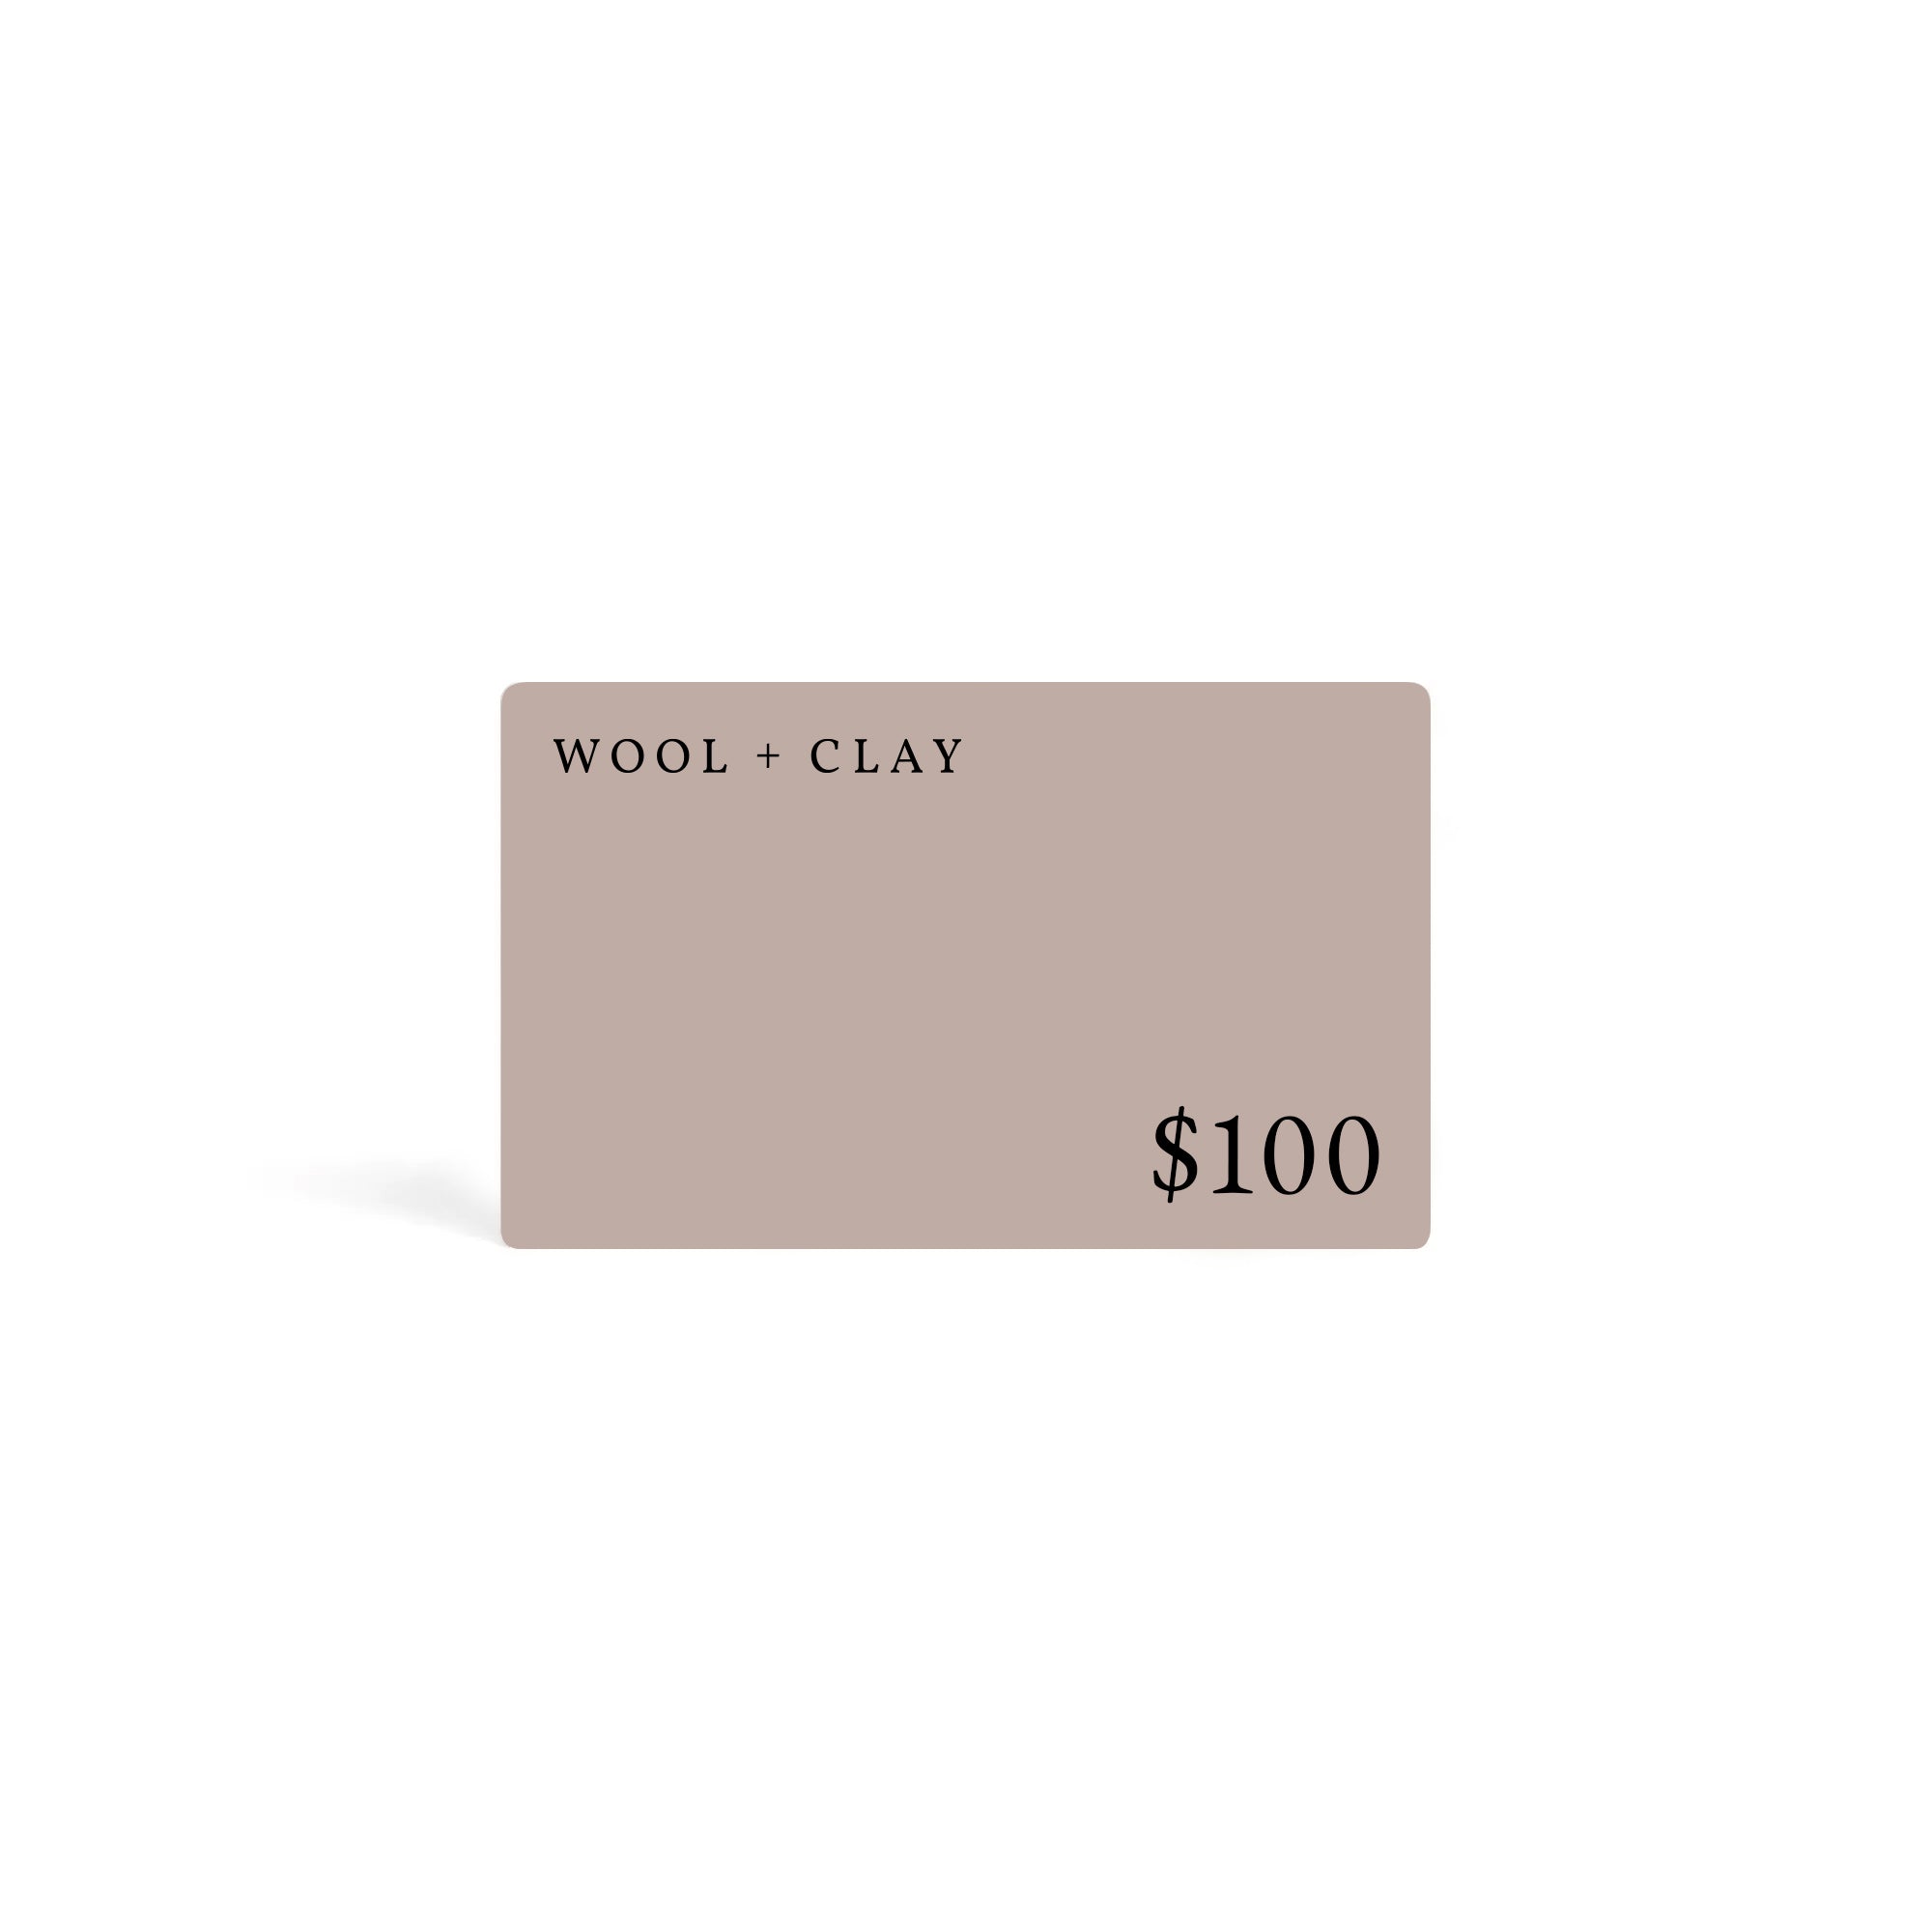 Wool+Clay Gift Card by Wool+Clay - Wool+Clay